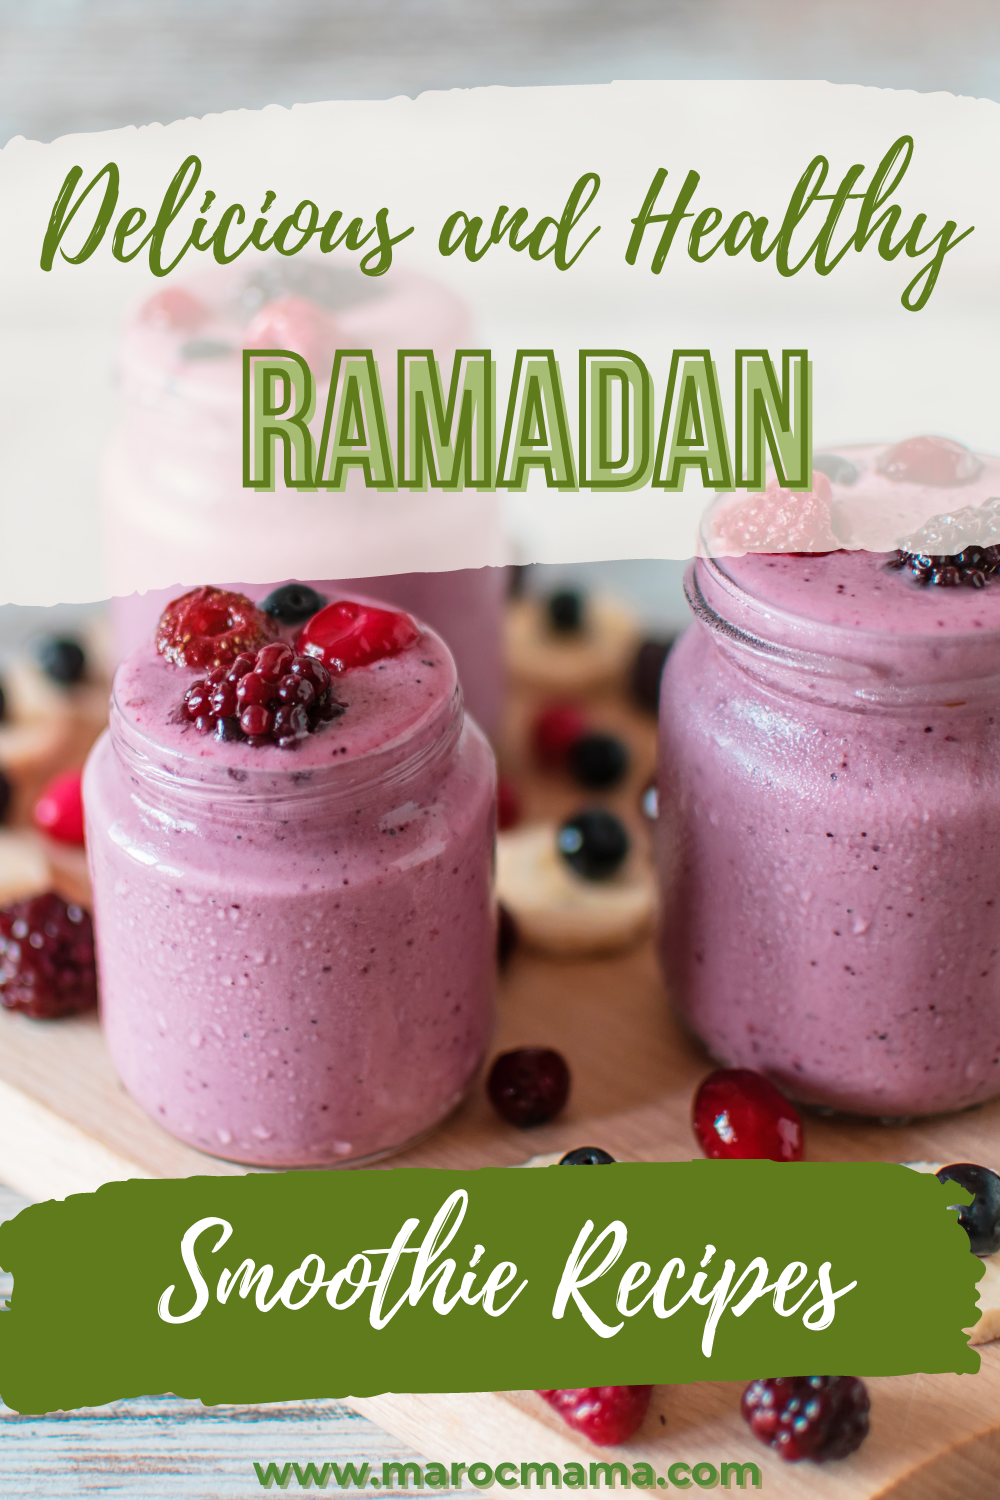 two servings of Ramandan smoothie recipes